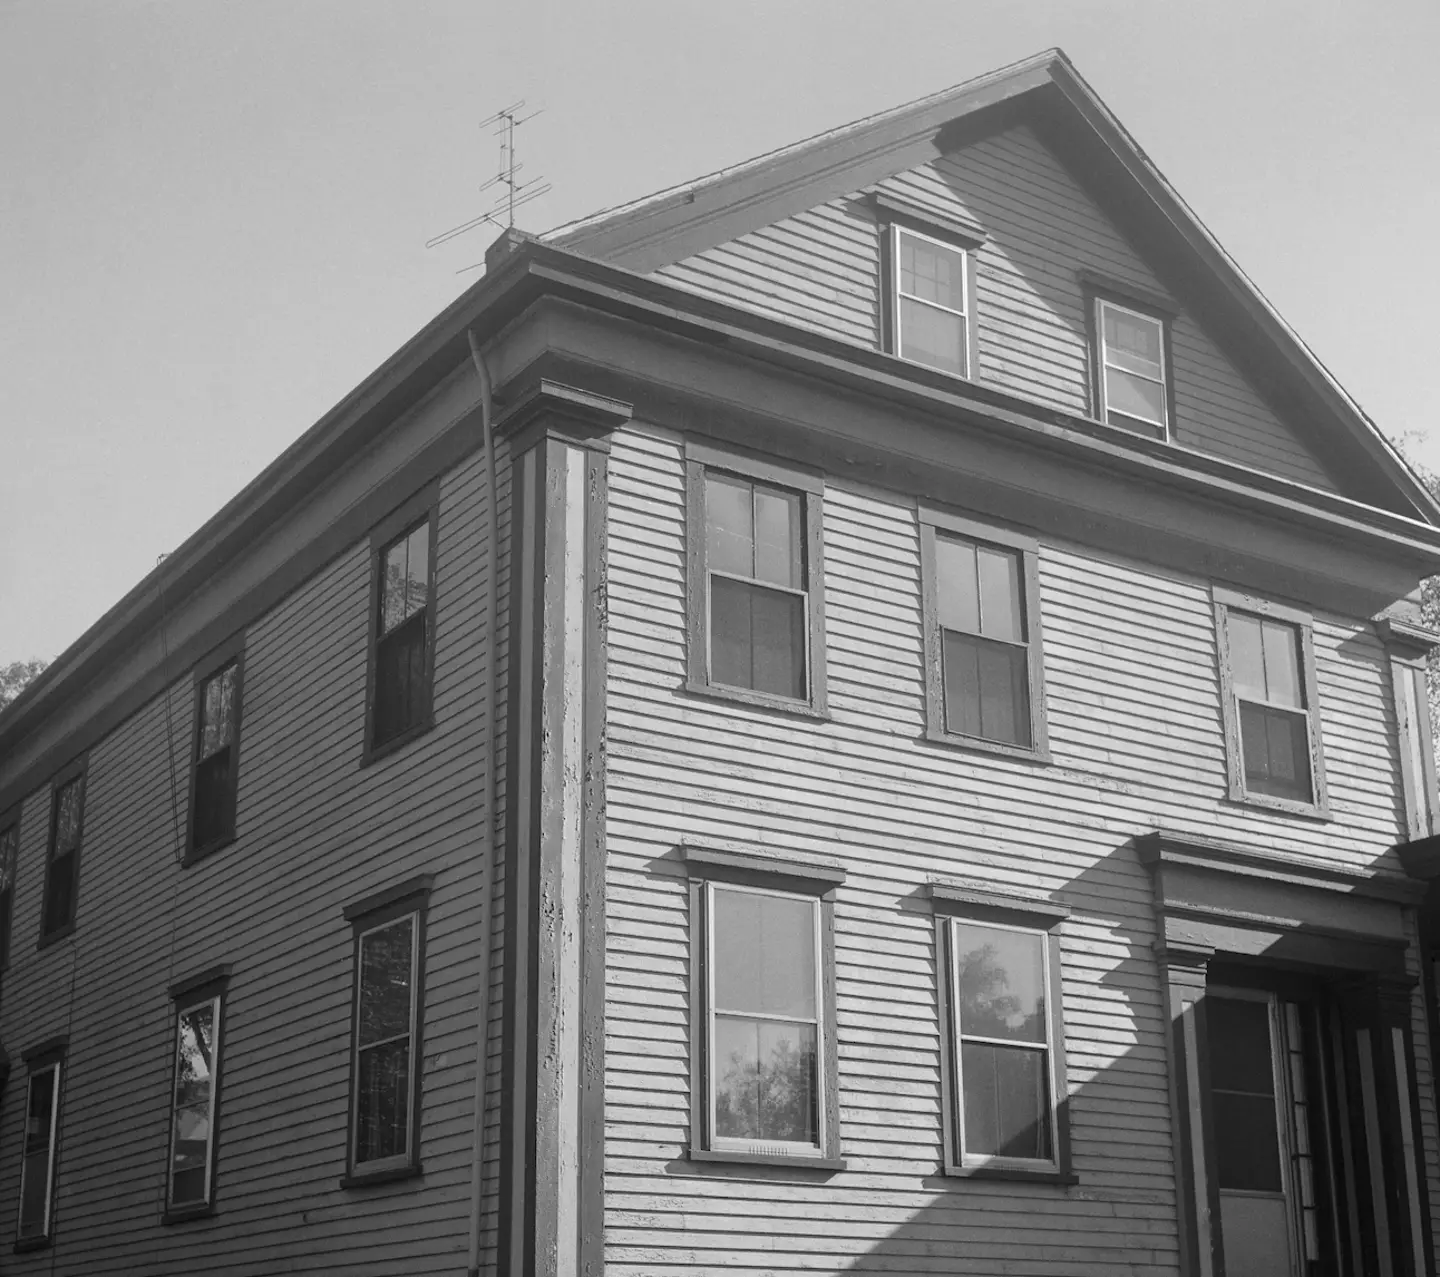 The Lizzie Borden House was the site of two murders.